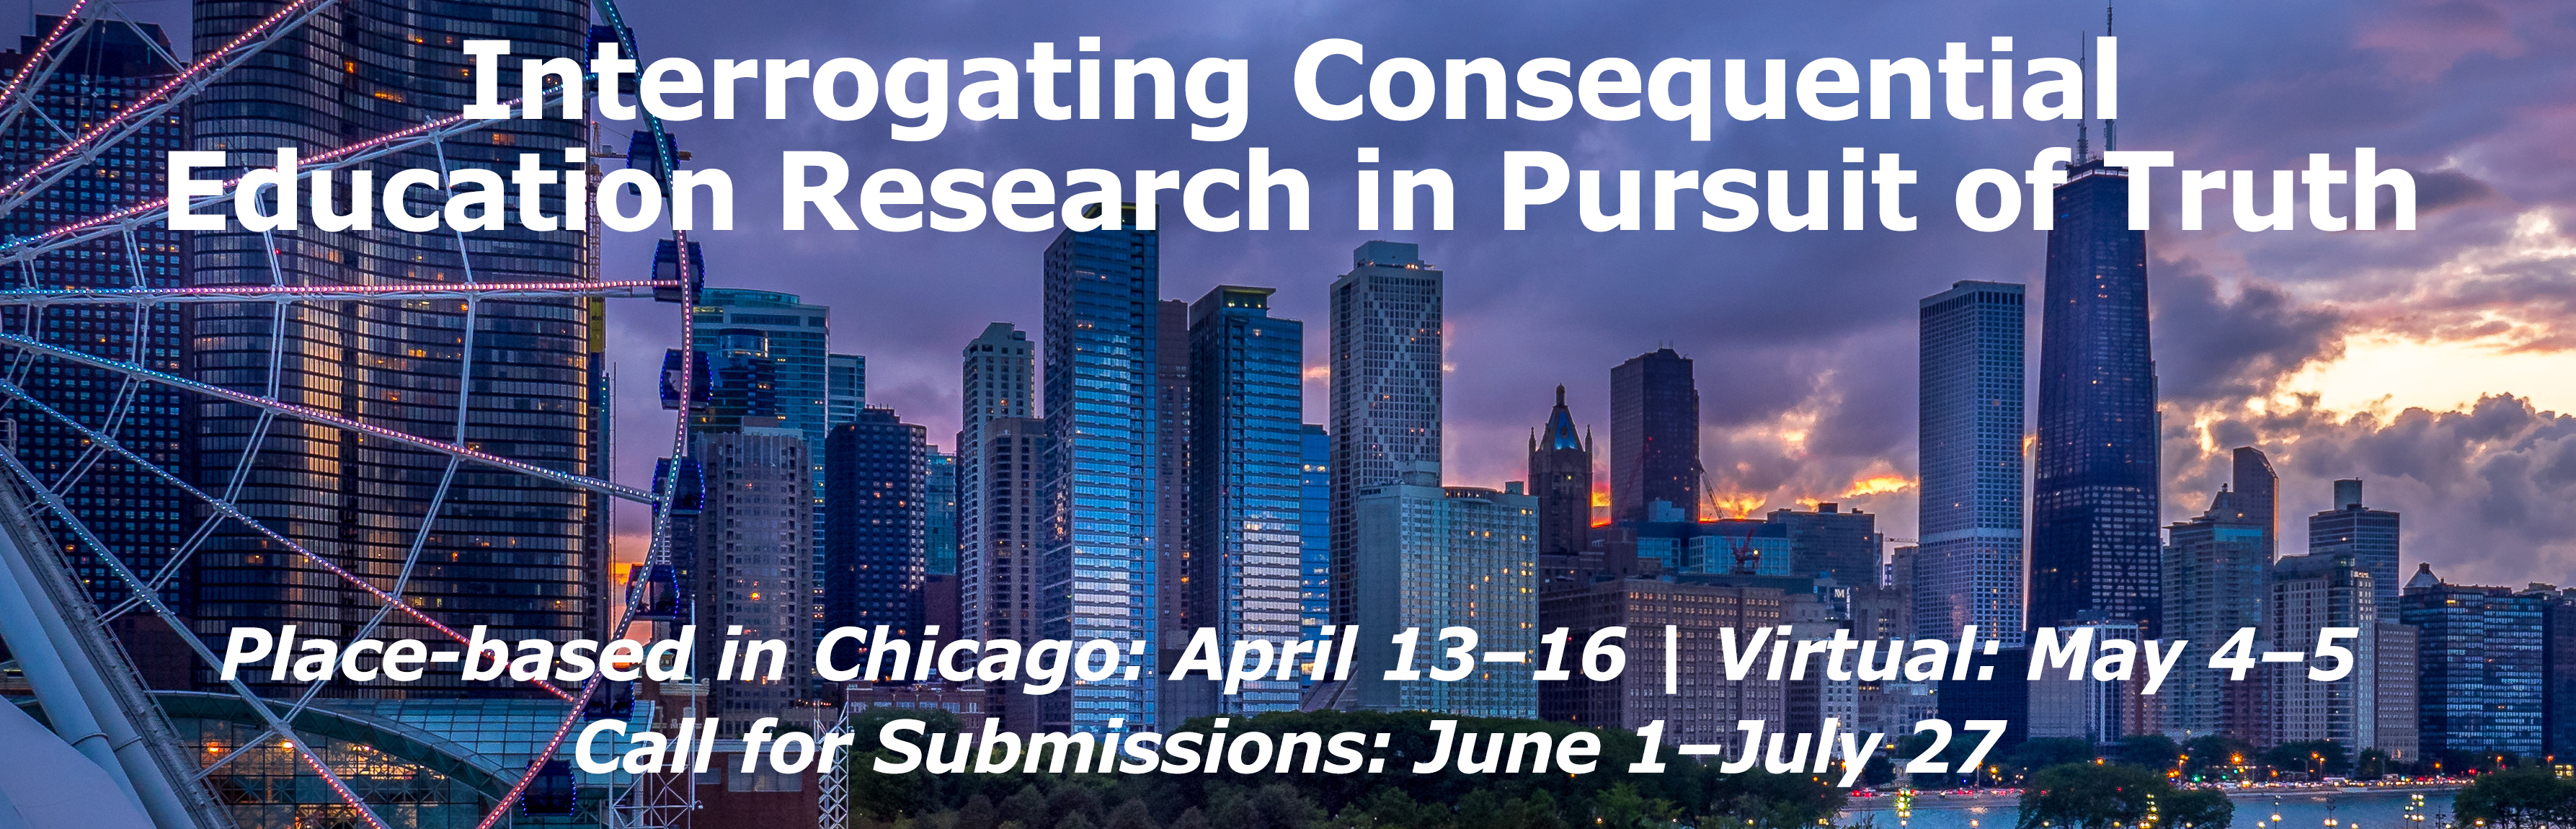 Interrogating Consequential Education Research in Pursuit of Truth. AERA 2023 Annual Meeting, Chicago, IL, April 13-16, 2023